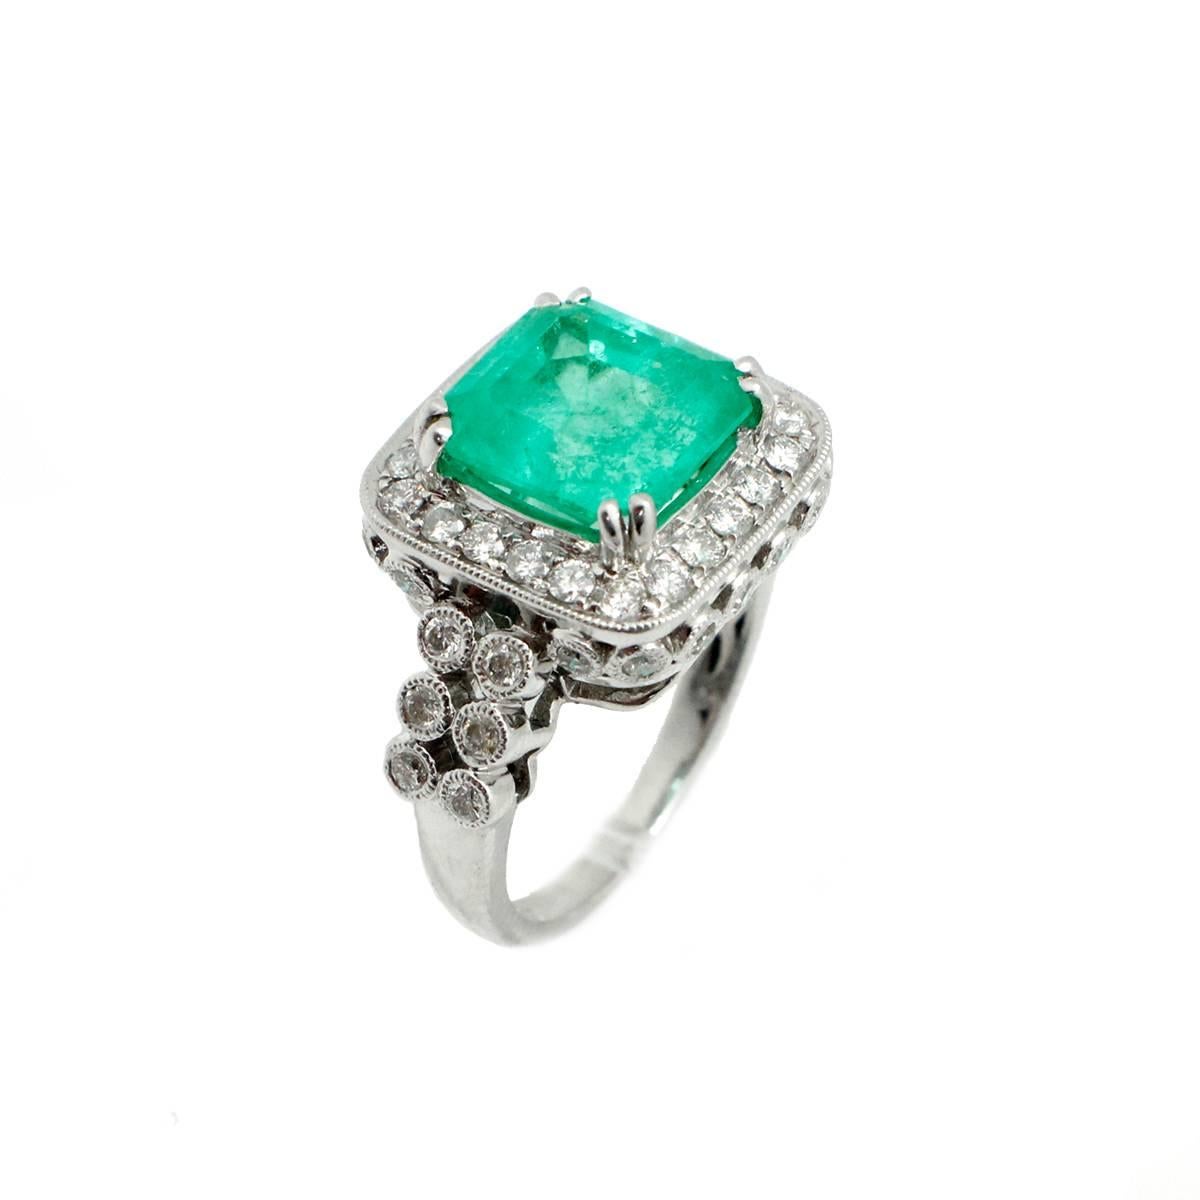 4.13 Carat Natural Emerald 1.50 Carats Diamonds 18kt White Gold Statement Ring In Excellent Condition For Sale In Scottsdale, AZ